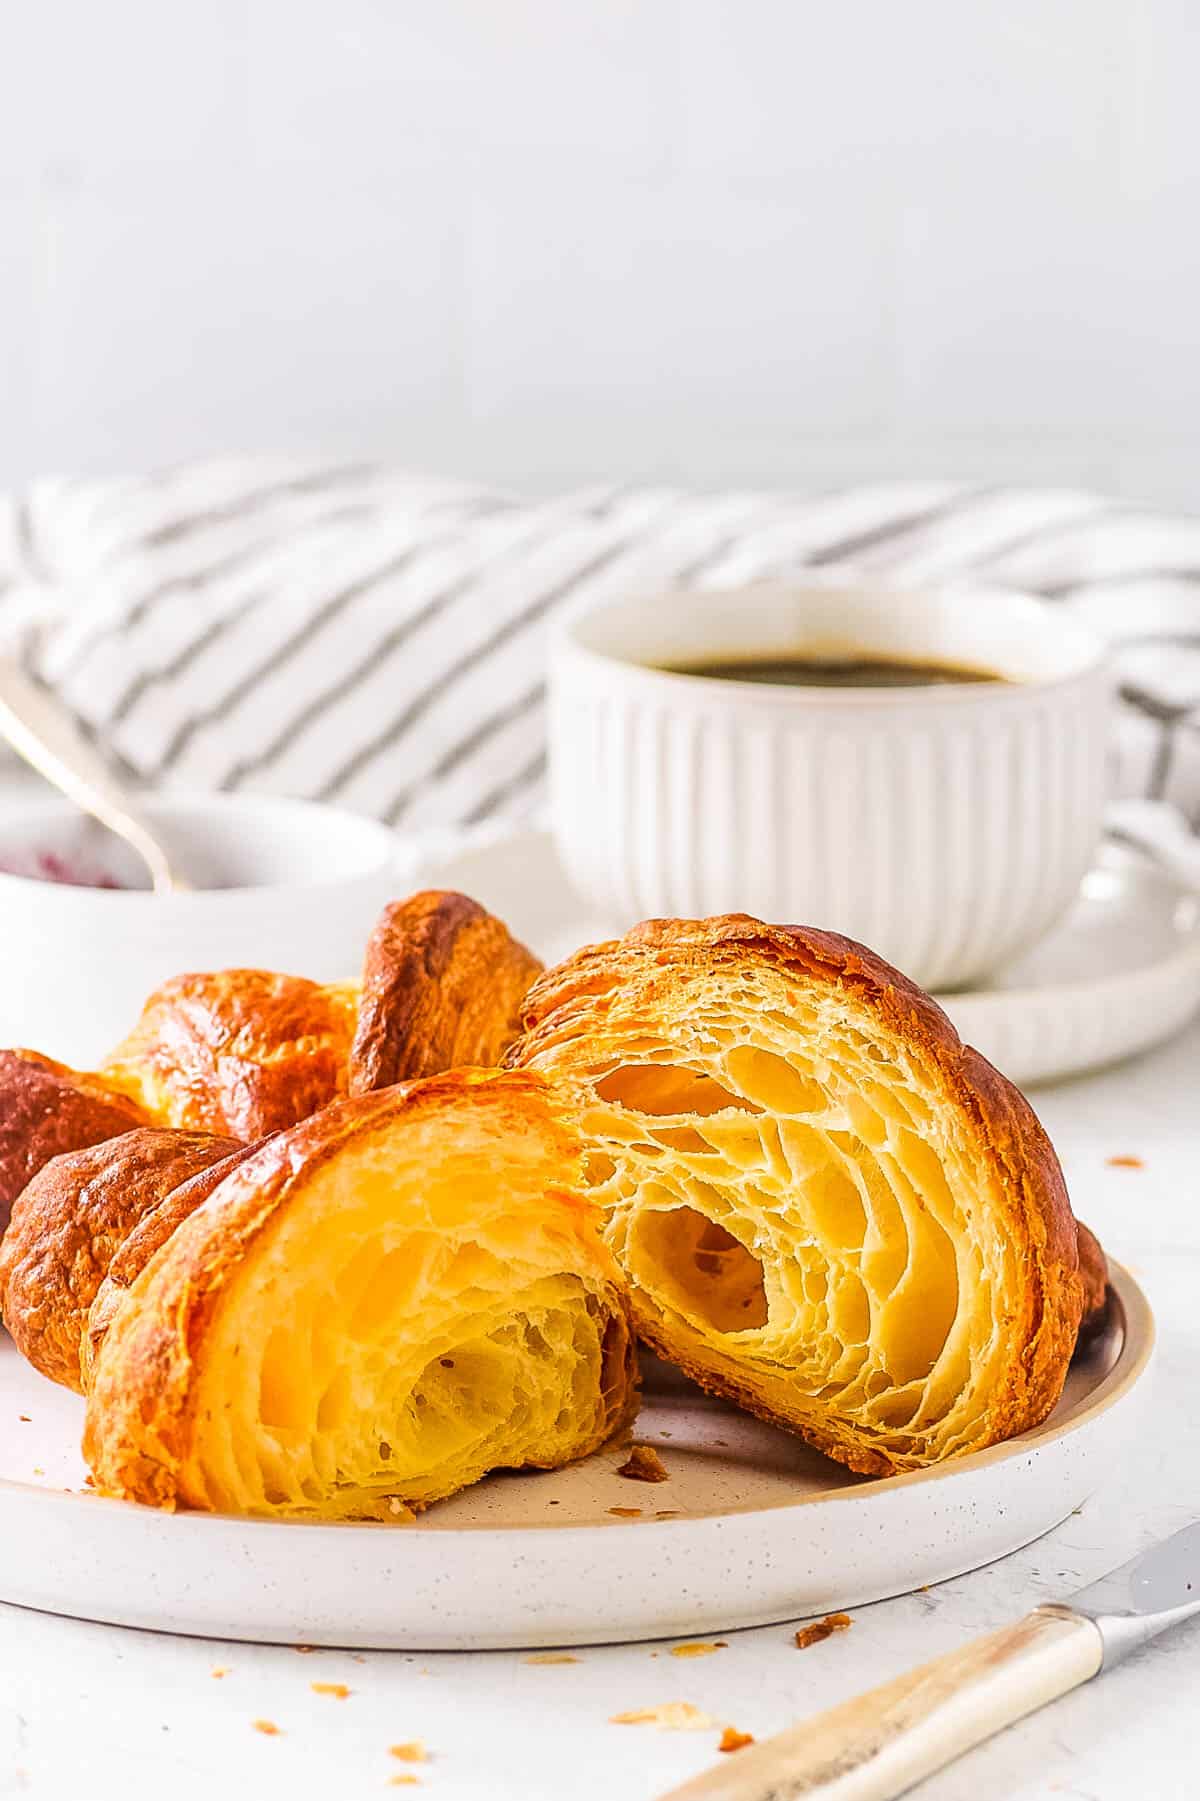 Homemade sourdough croissants, served on a white plate with coffee on the side.